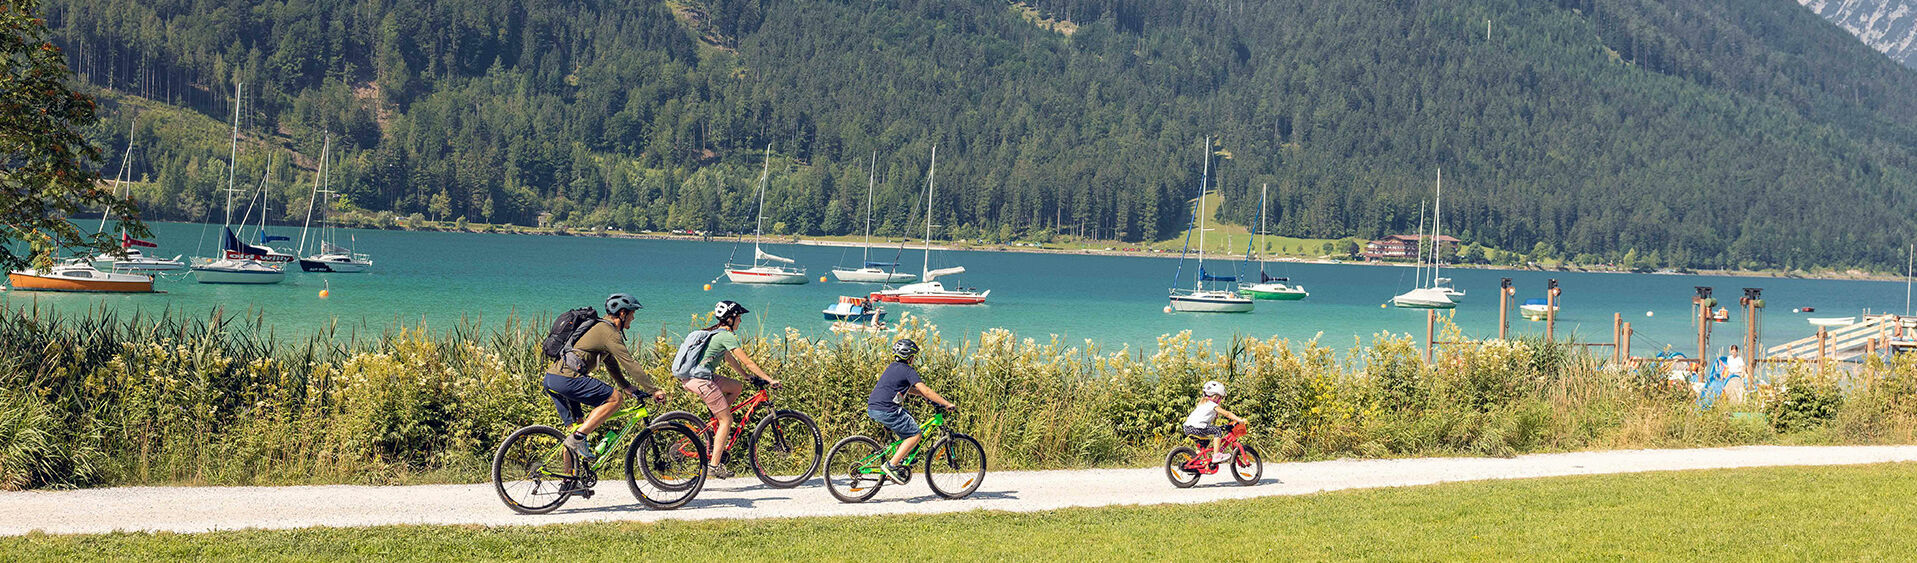 A family with children explores the lakeshore in Maurach am Achensee by bike. In the background of this photo are several sailboats.